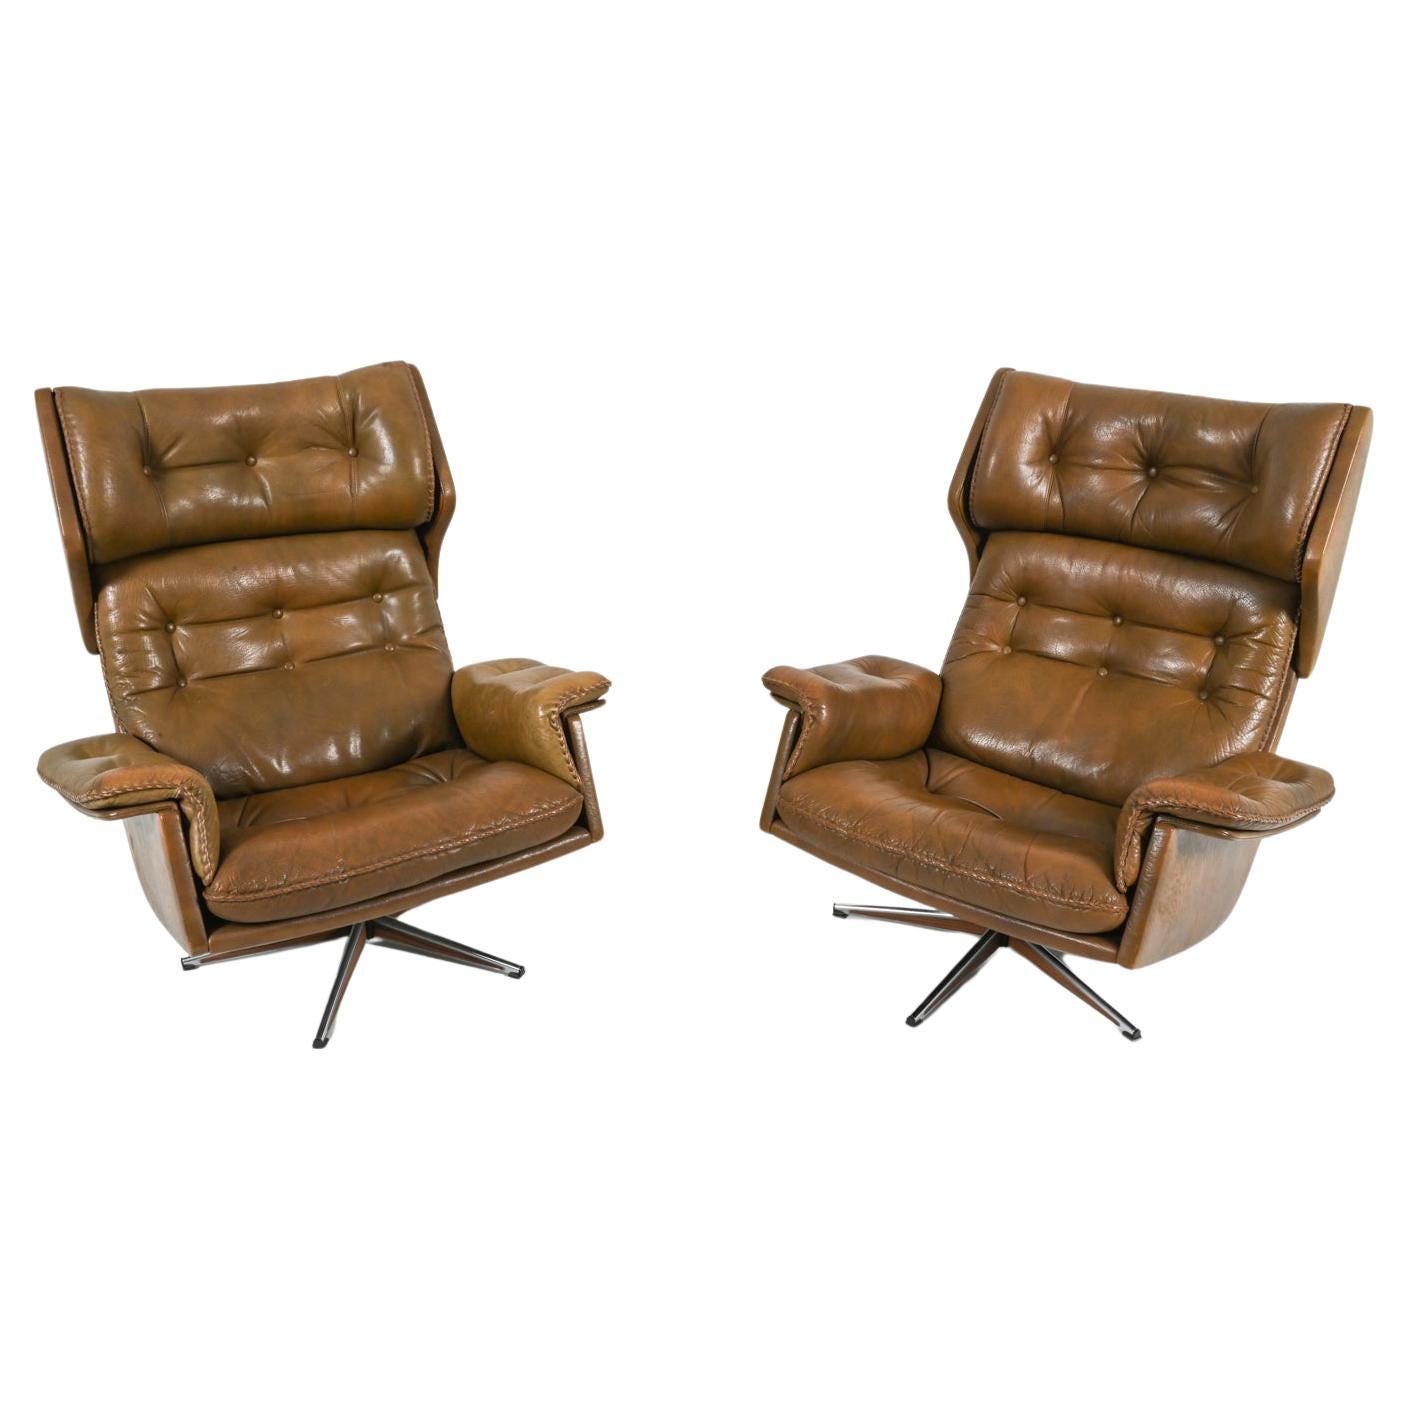 Pair of Buffalo Leather Swivel Chairs By Arne Norell, Swedish 1960's For Sale